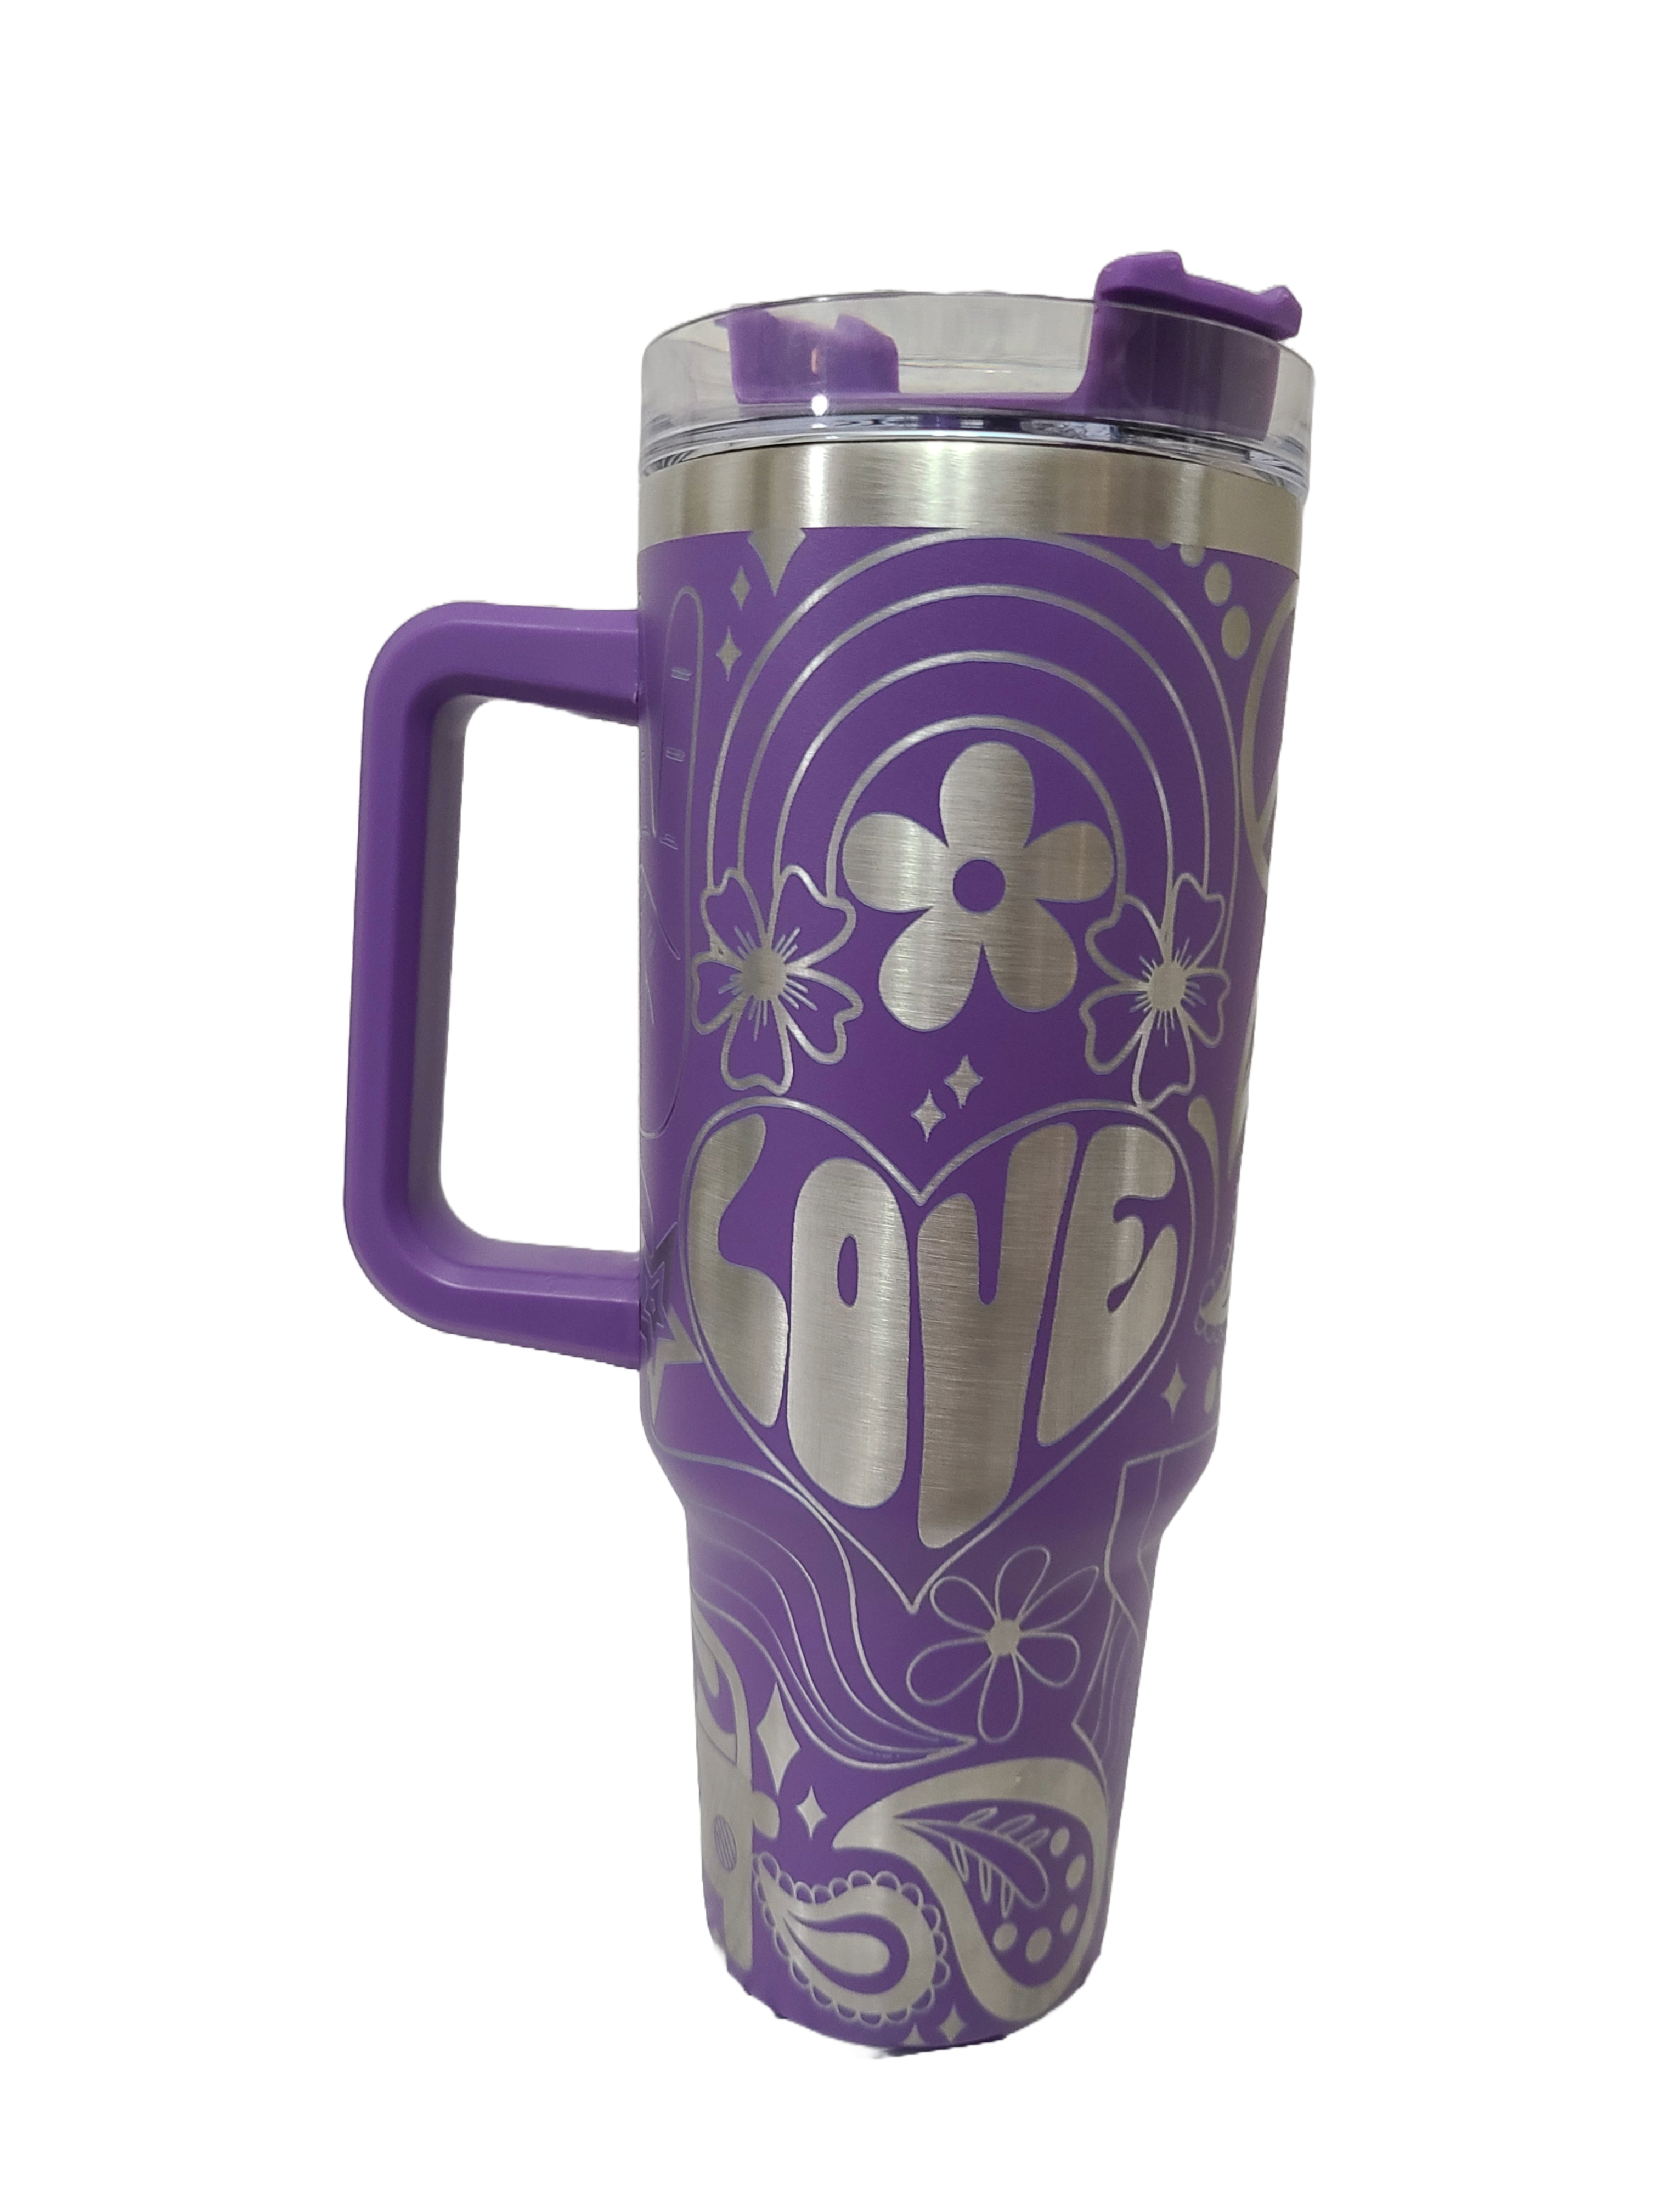 40 oz Stainless Steel Tumbler with Handle "70's Theme"